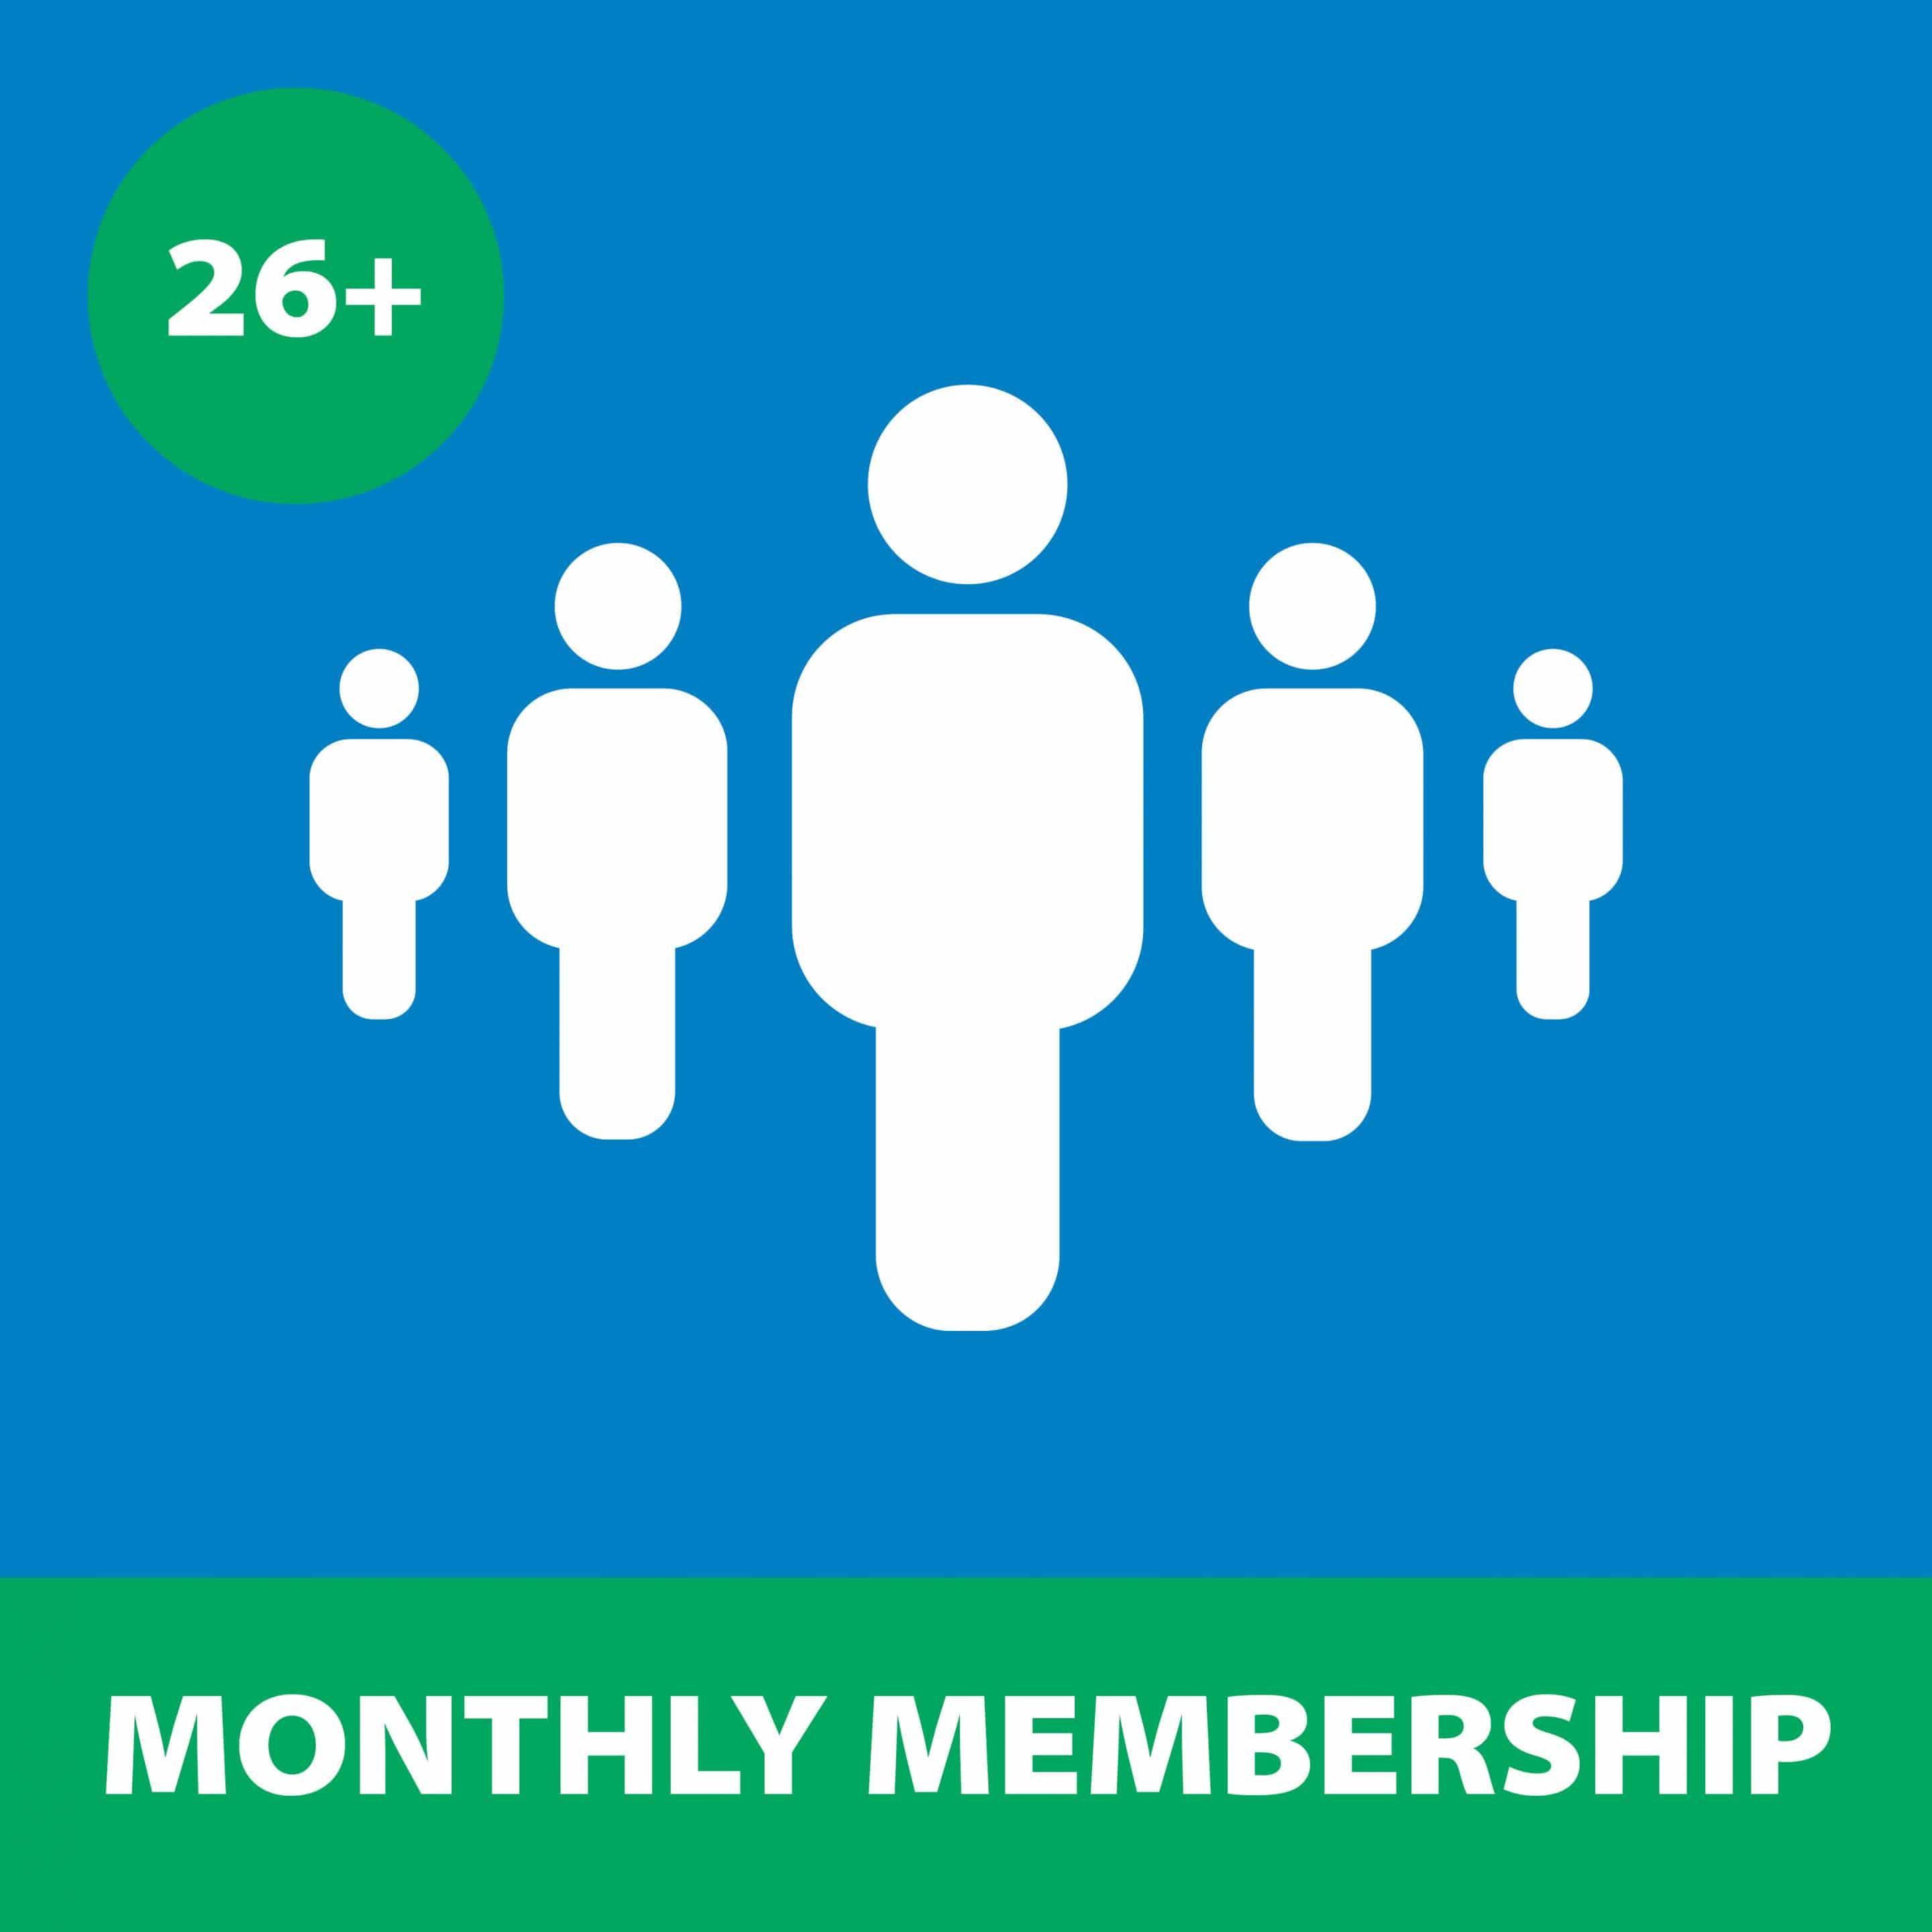 Corporate Membership (Organisations with 26+ Employees – Monthly)